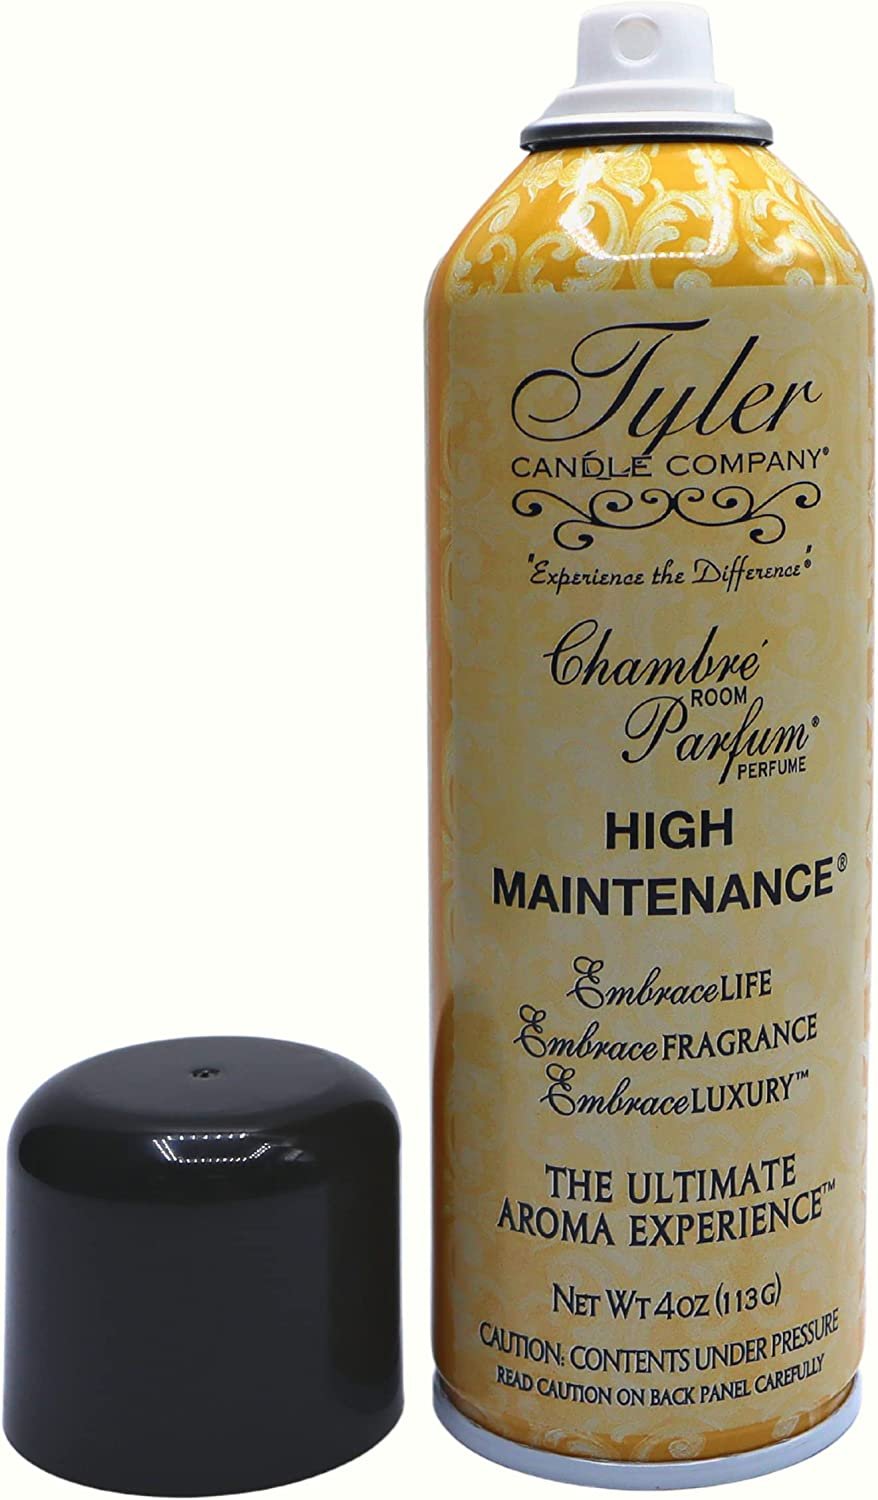 Tyler Candle Company High Maintenance Signature Fragrance Chambre Parfum - Luxury High Maintenance Scent Air Freshener / Fragrant Room Air Spray - 4 Oz Container - The Ultimate Aromatic Experience